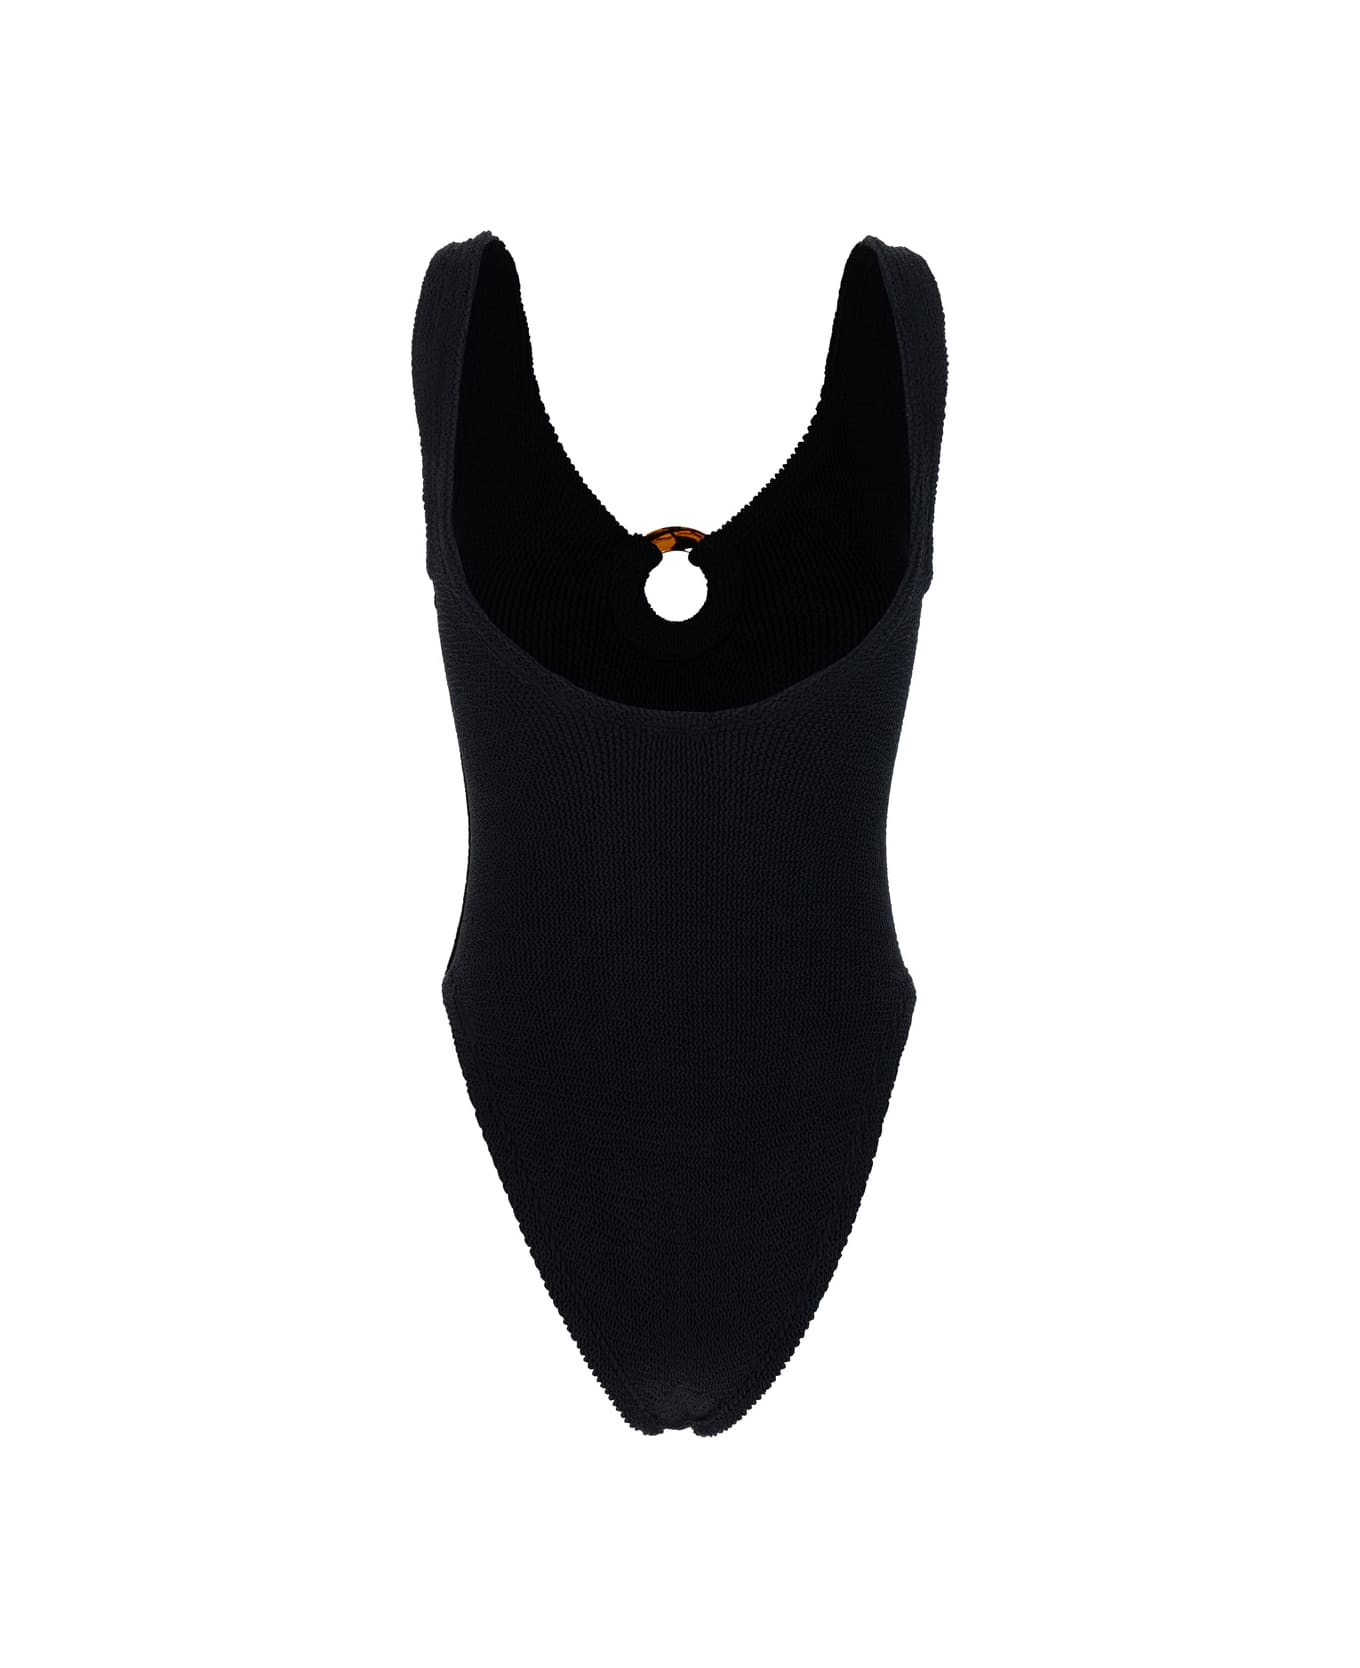 Hunza G 'celine' Black One-piece Swimsuit With Ring Detail In Stretch Polyamide Woman - Black 水着